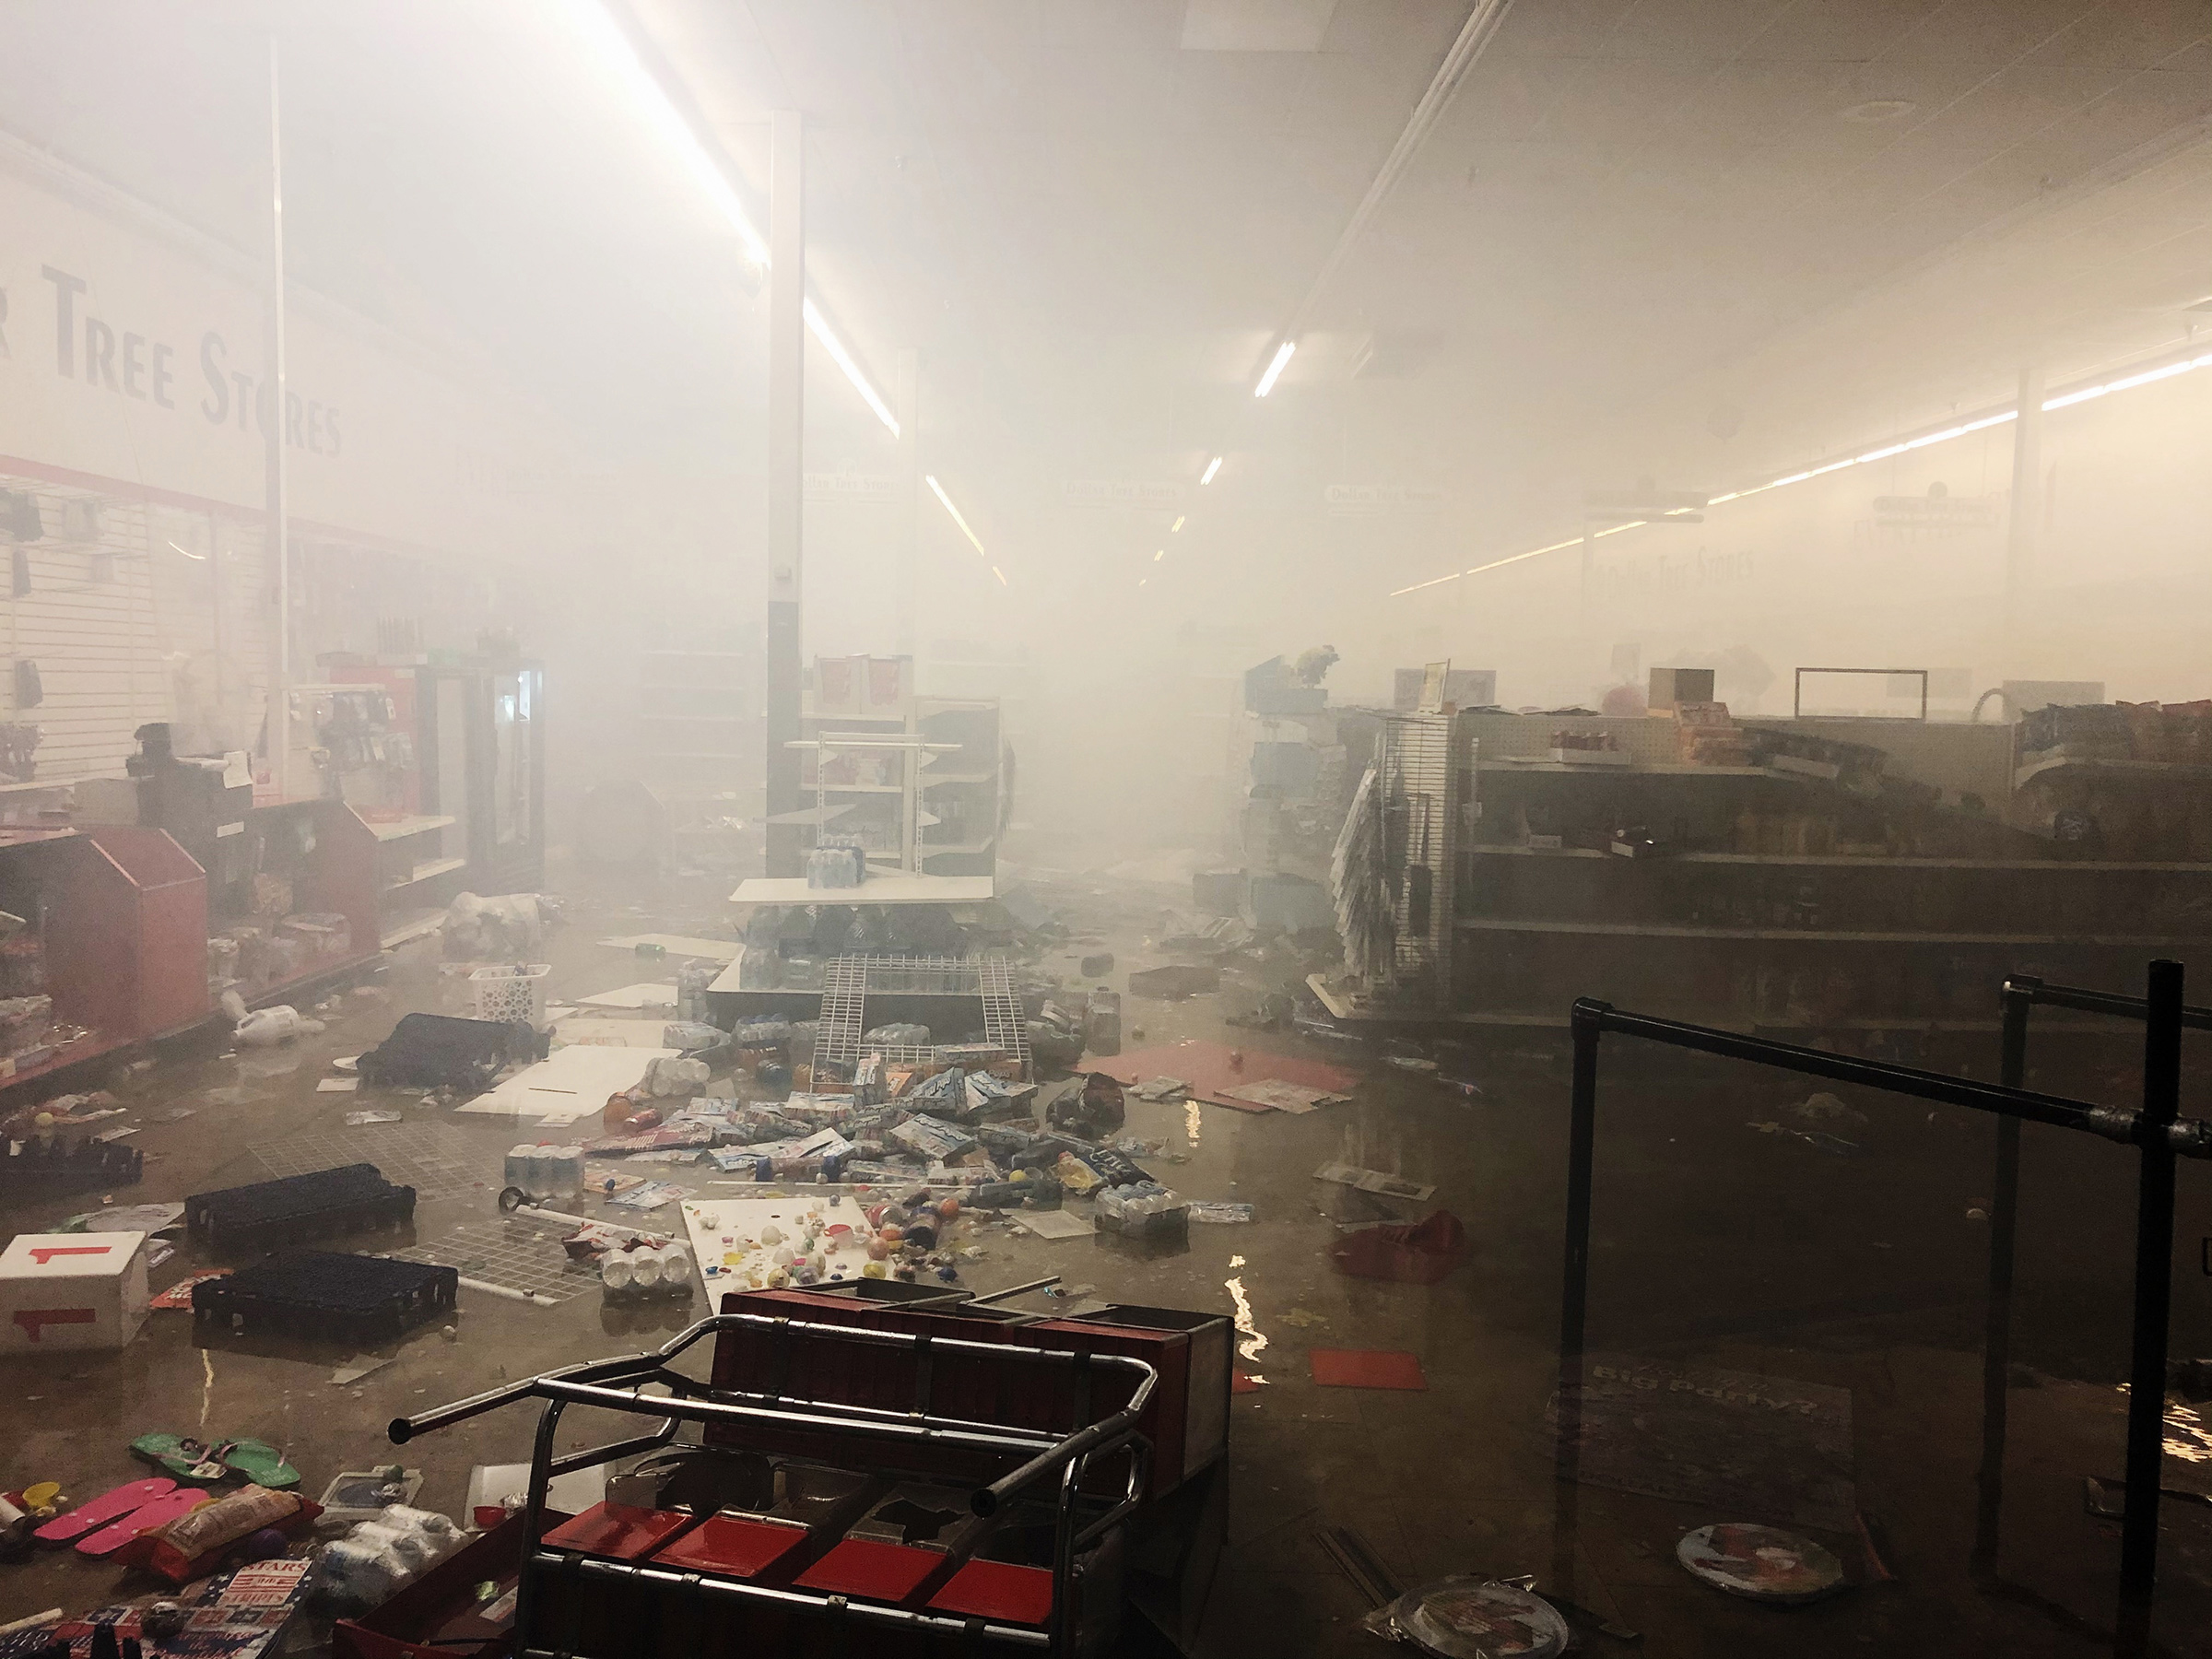 The remains of a Dollar Tree store smolders after protests in Minneapolis on May 28, 2020. (Patience Zalanga for TIME)